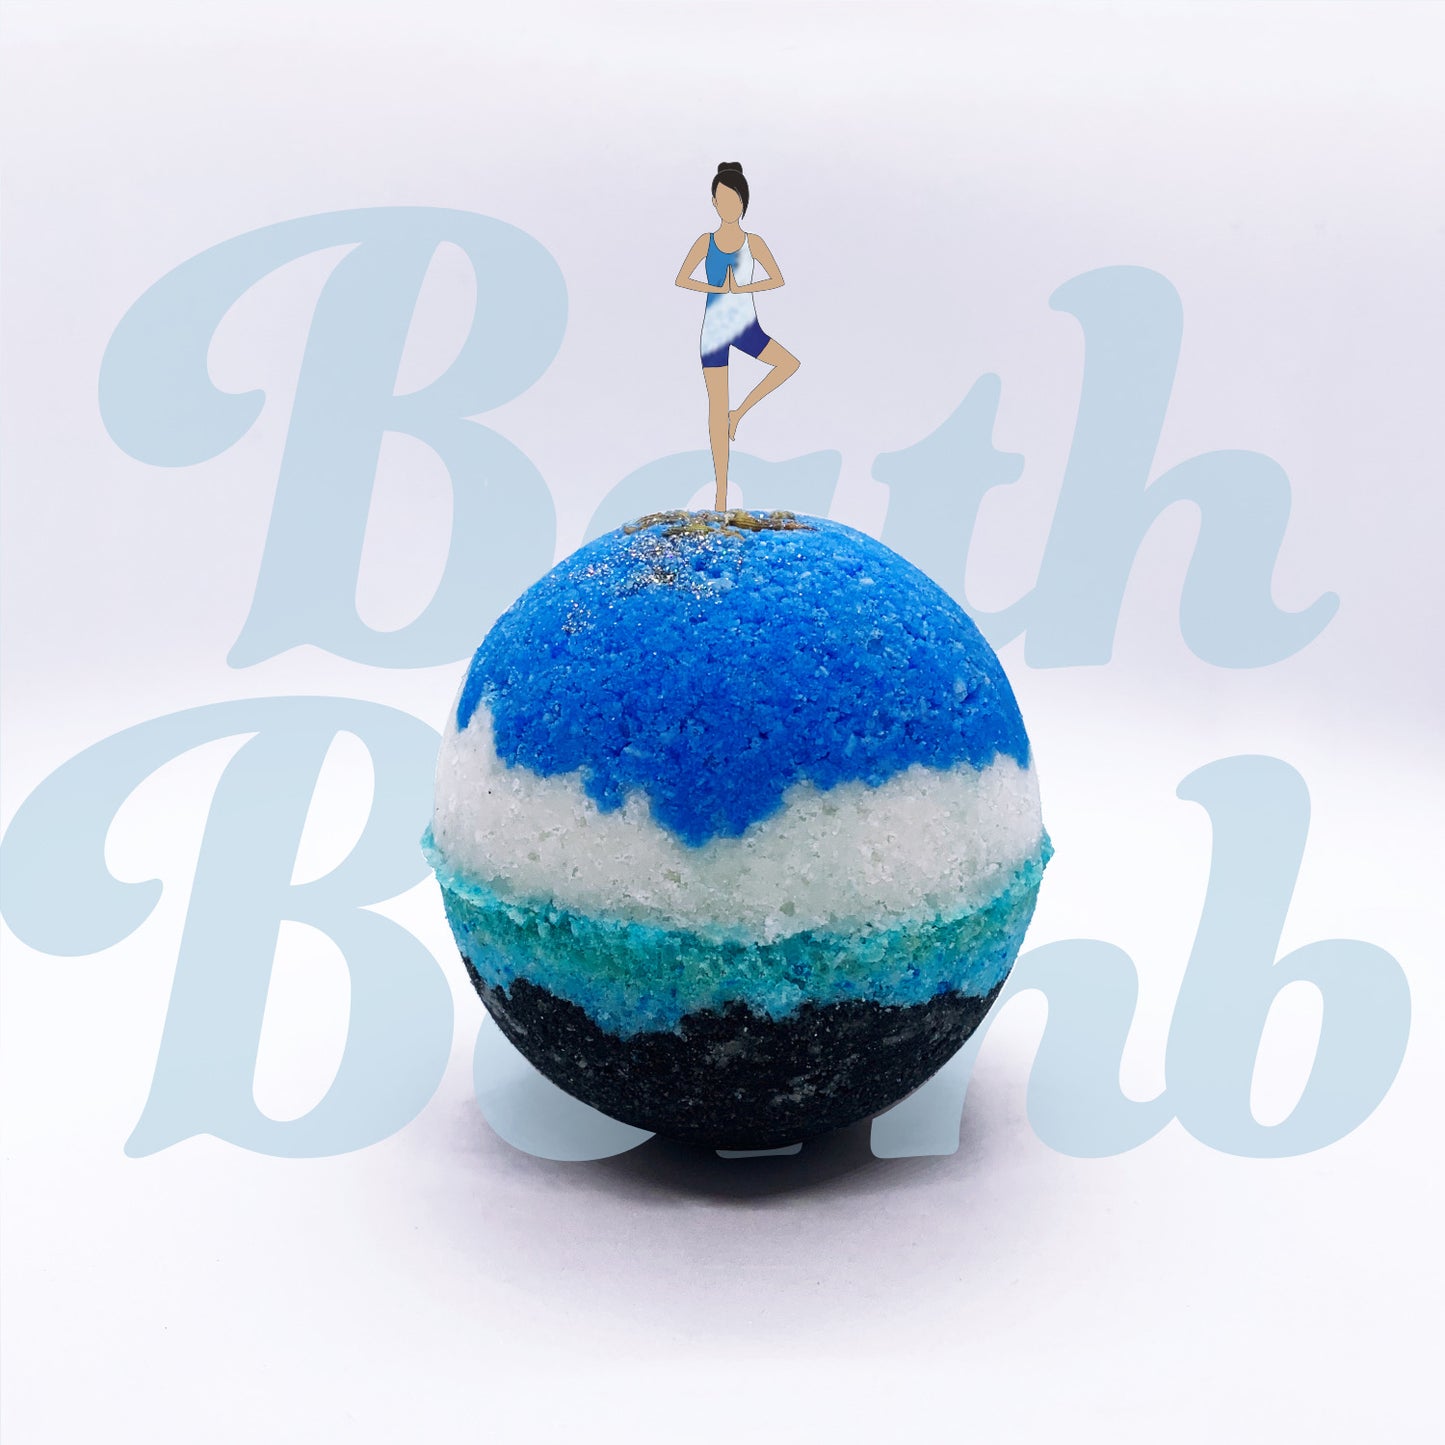 Multilayered Epsom salt and baking soda based fizzy bath bomb in blue, white, turquoise and black and lavender buds on top with an illustrated woman doing yoga on the peak